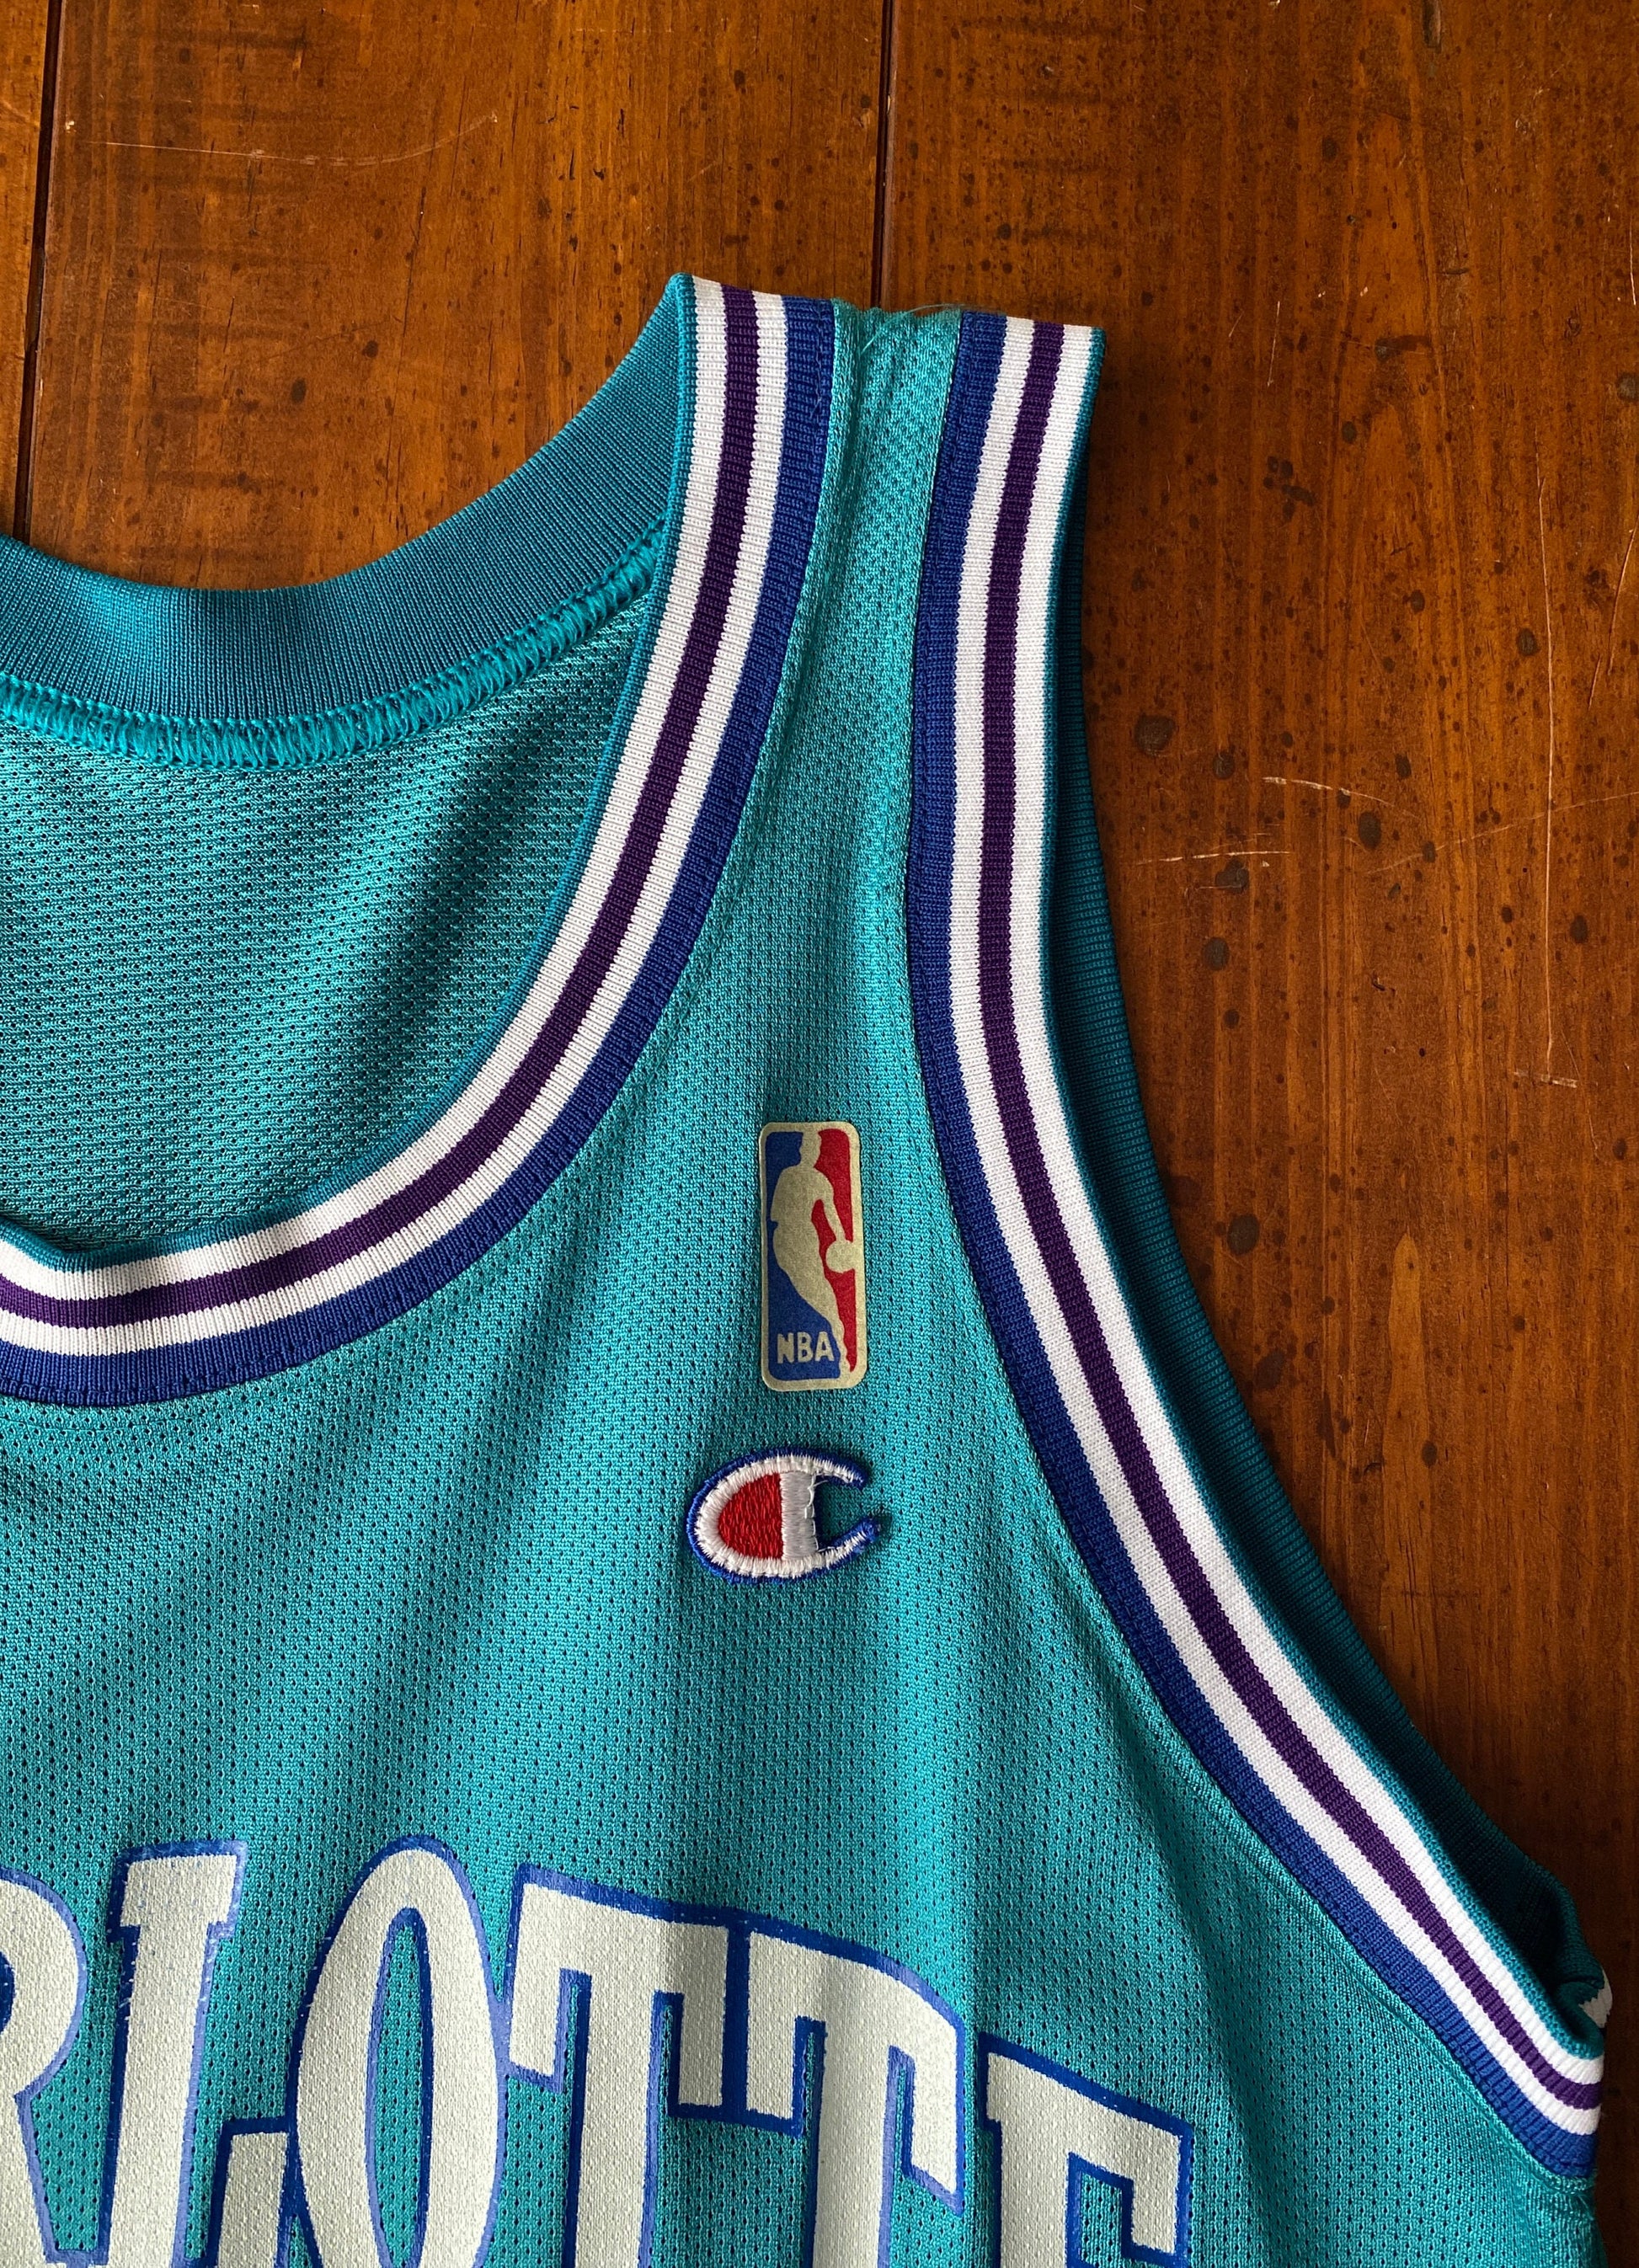 Authentic NBA Jersey - #2 Johnson Charlotte Hornets - Size 40, Made in USA by Champion